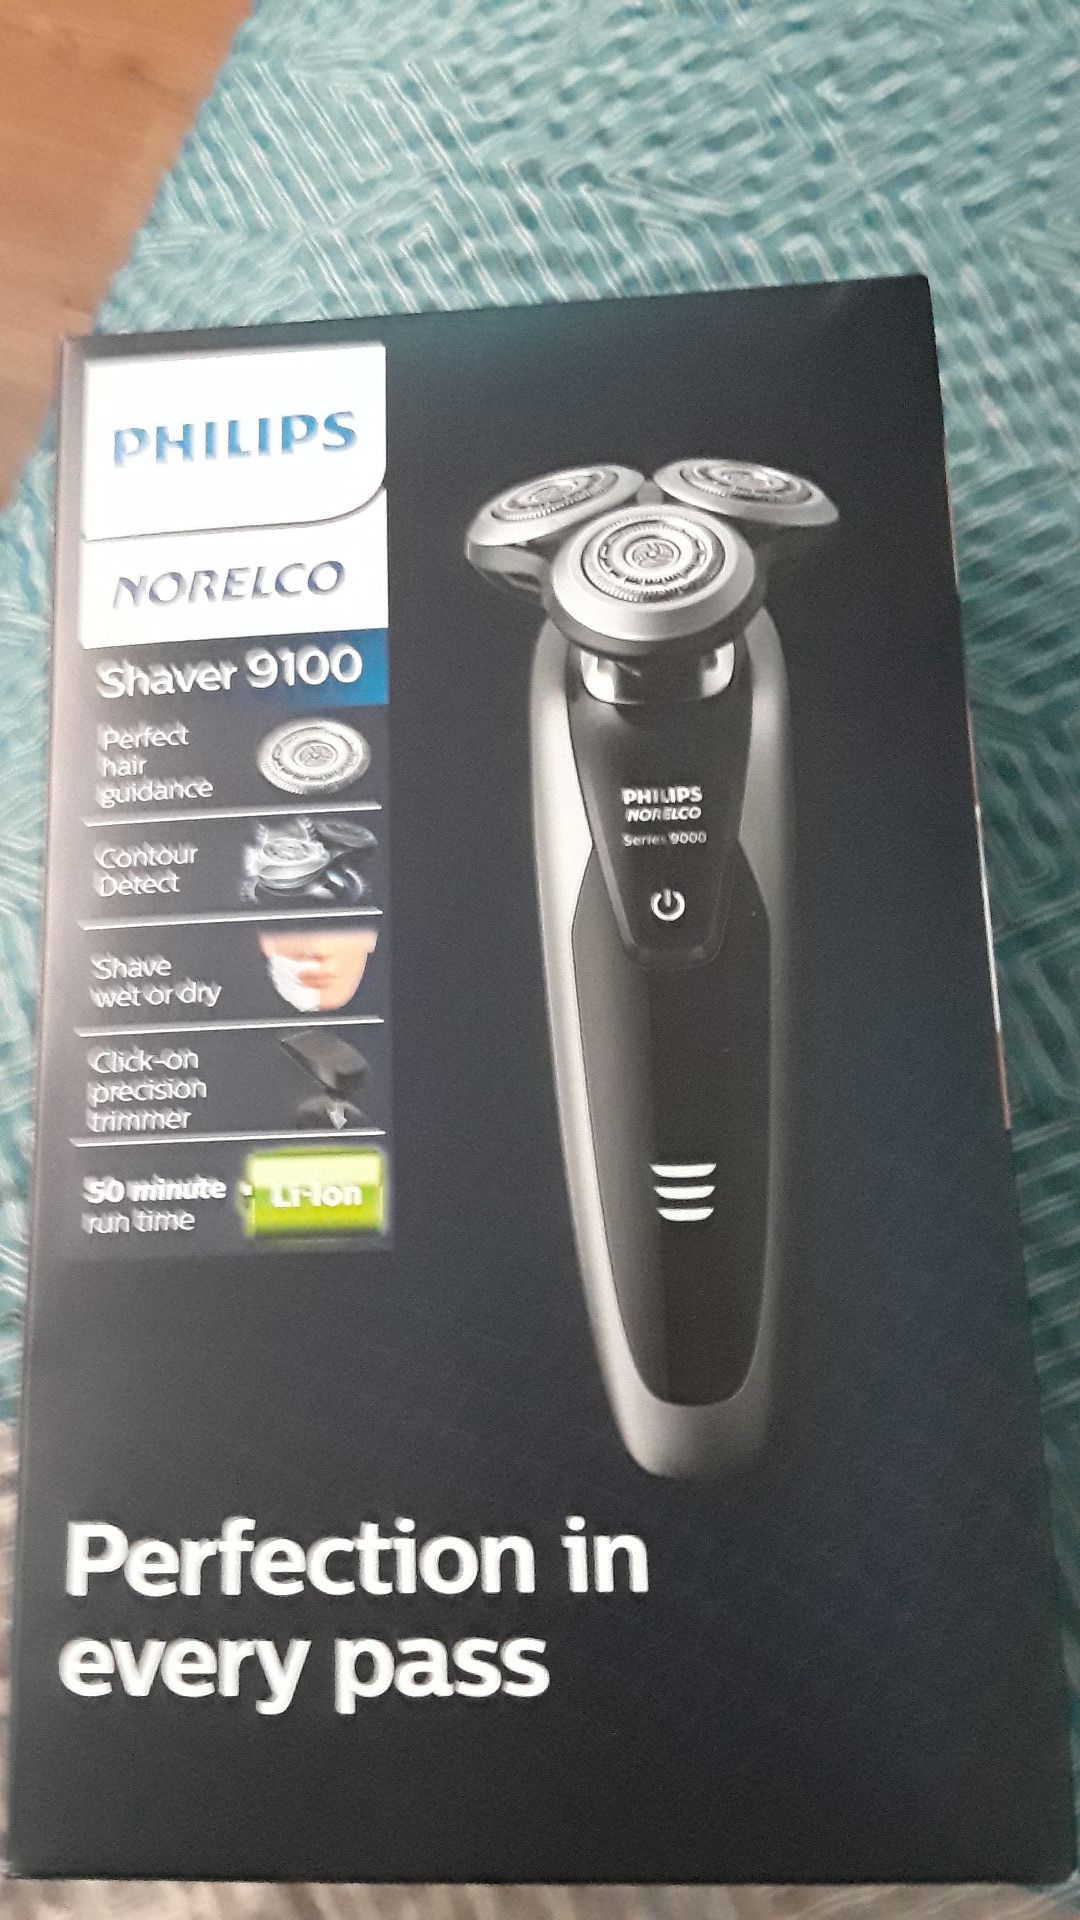 Phillips norelco shaver 9100